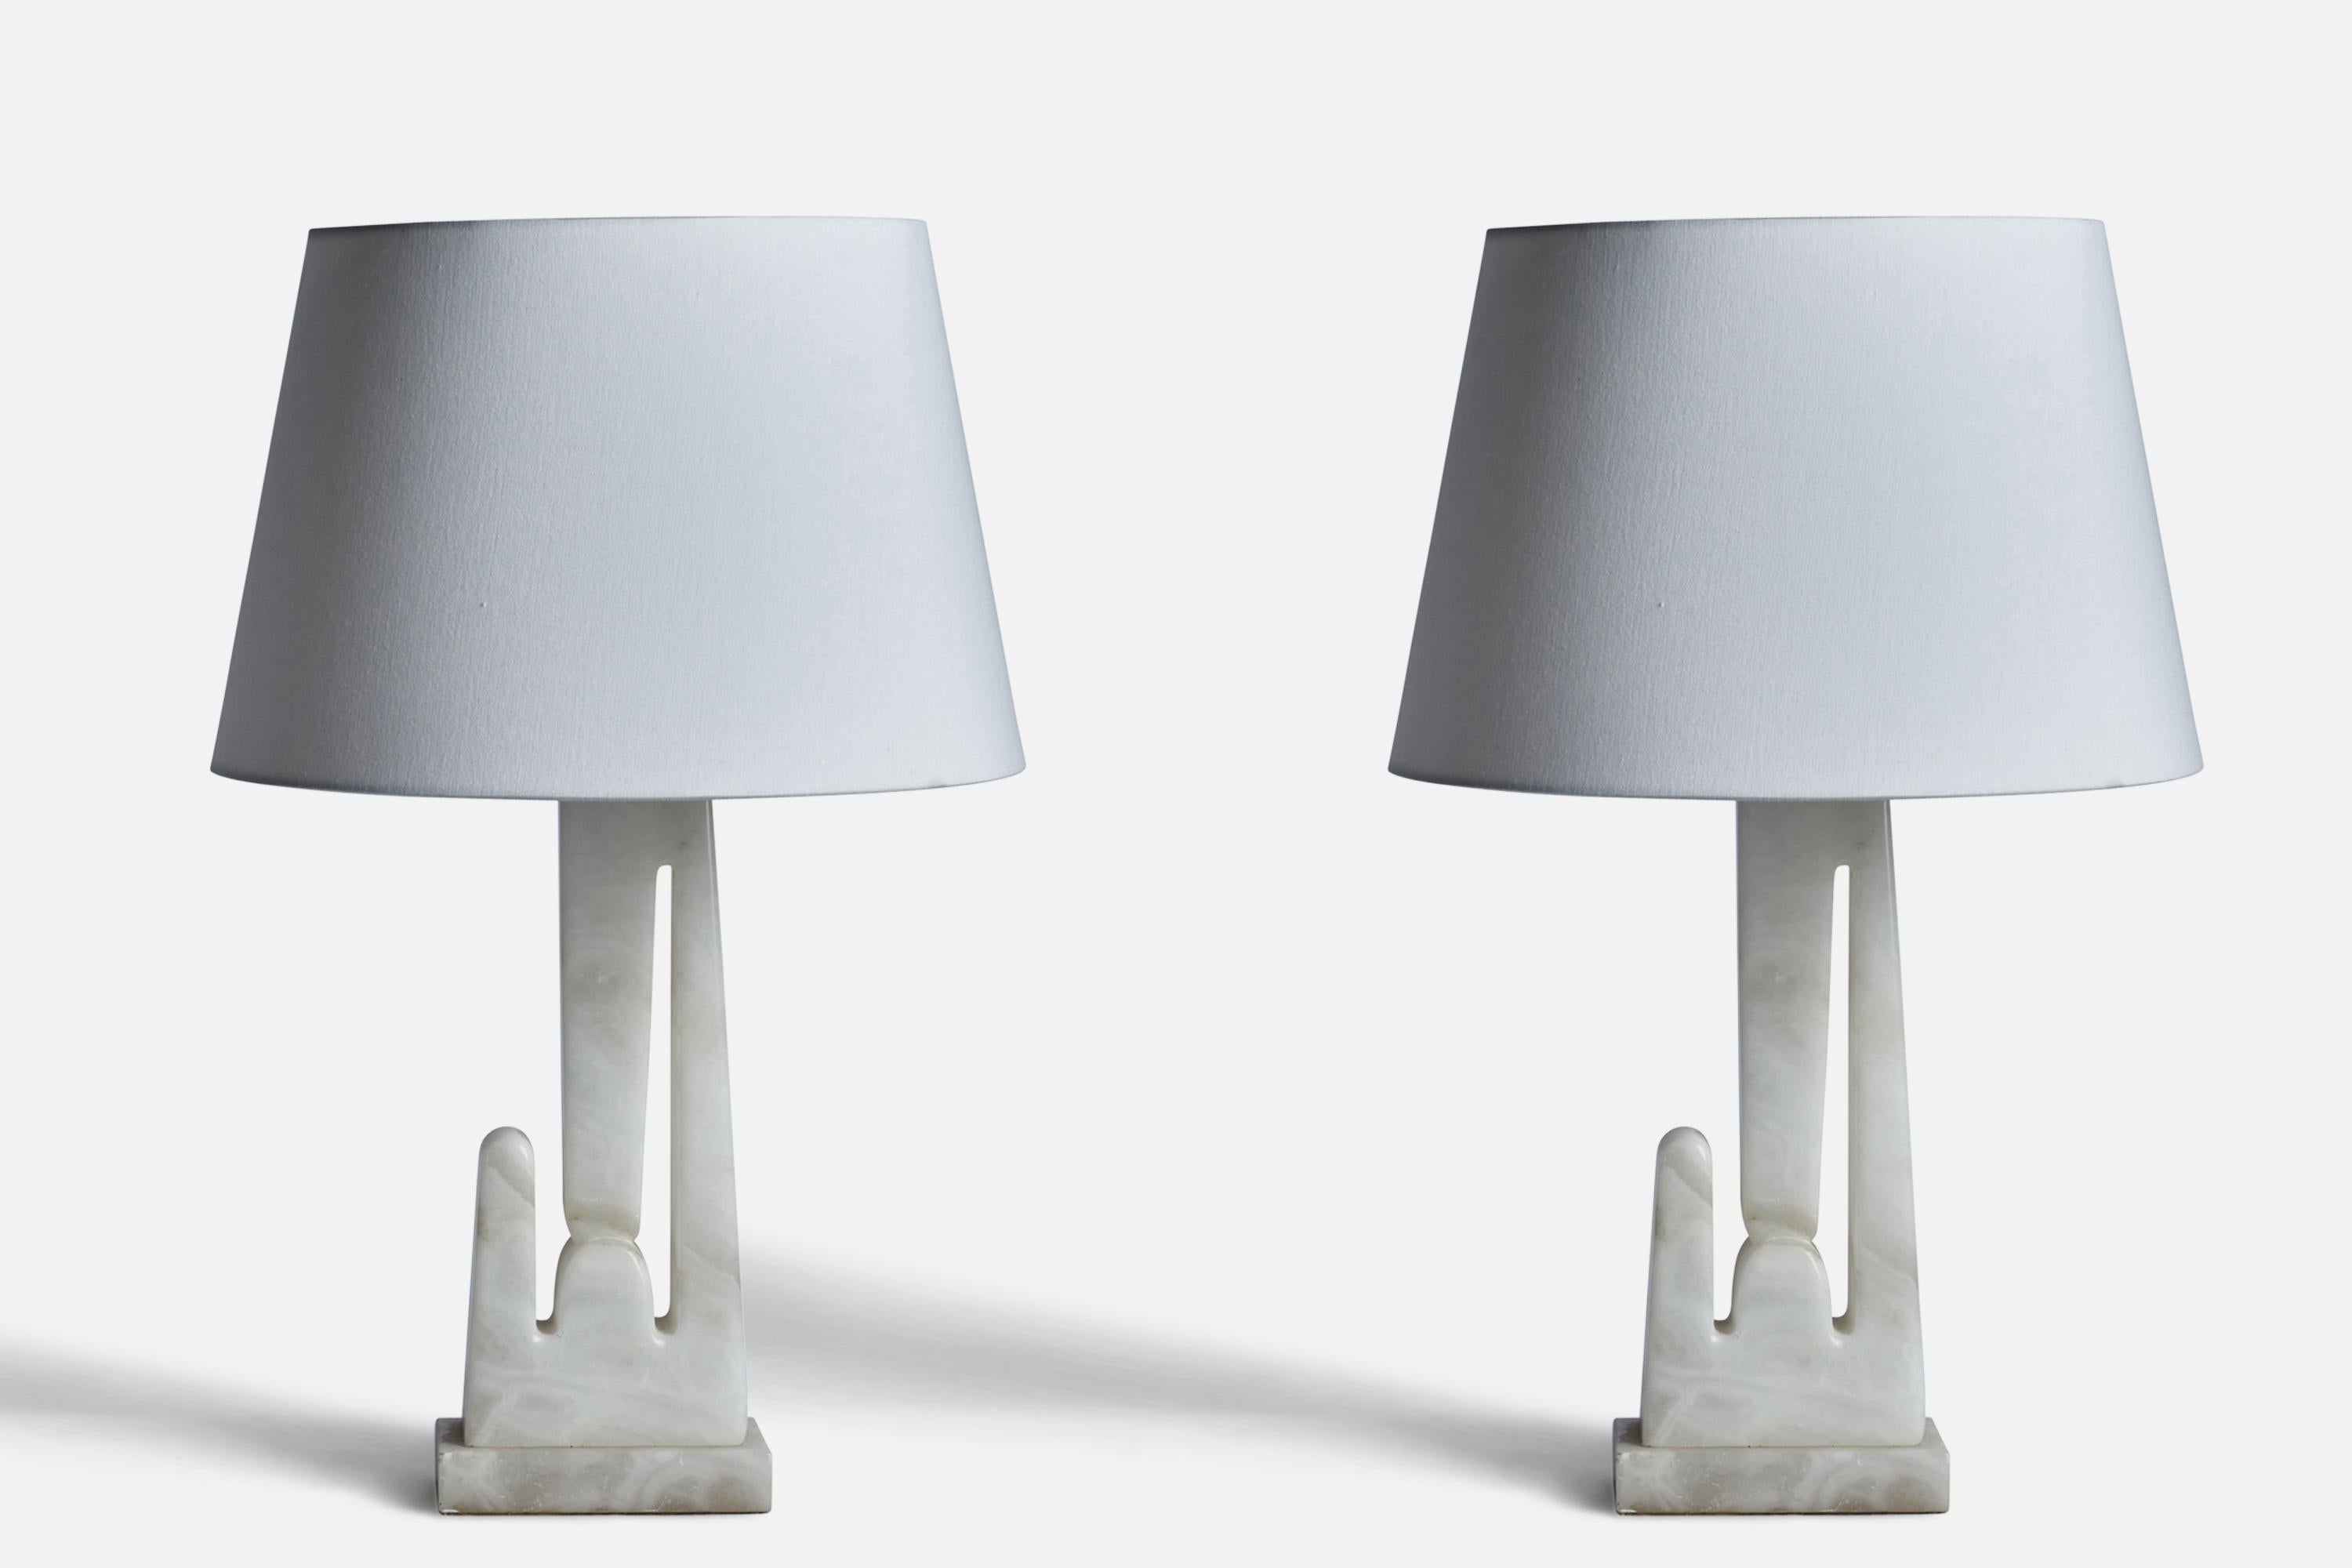 A pair of marble table lamps designed and produced in the US, 1950s.

Dimensions of Lamp (inches): 18.75” H x 6.5” W x 4.15” D
Dimensions of Shade (inches): 12” Top Diameter x 16” Bottom Diameter x 10.75” H
Dimensions of Lamp with Shade (inches):